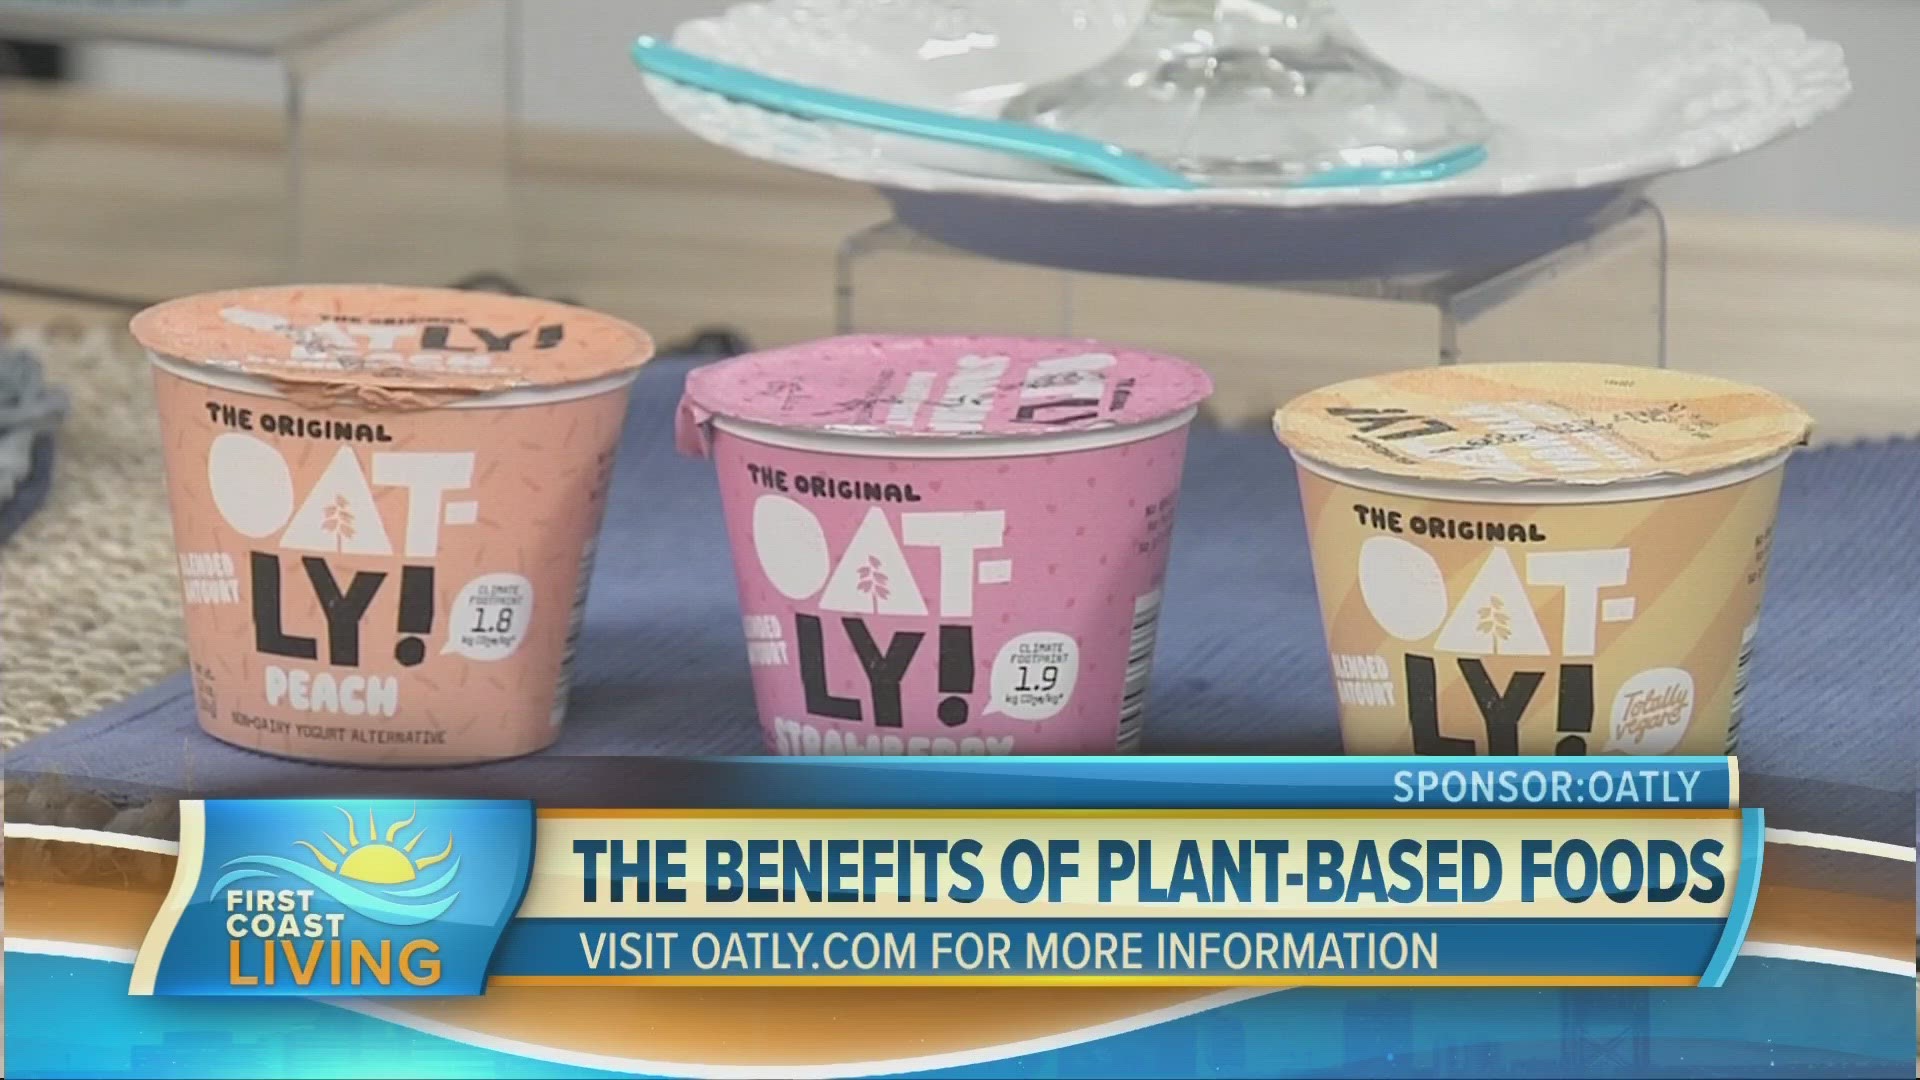 ‘NON-DIET DIETITIAN’ Cara Harbstreet, MS, RD,LD, teams up with Oatly to share delicious options and uniquely ‘intuitive’ recipes.